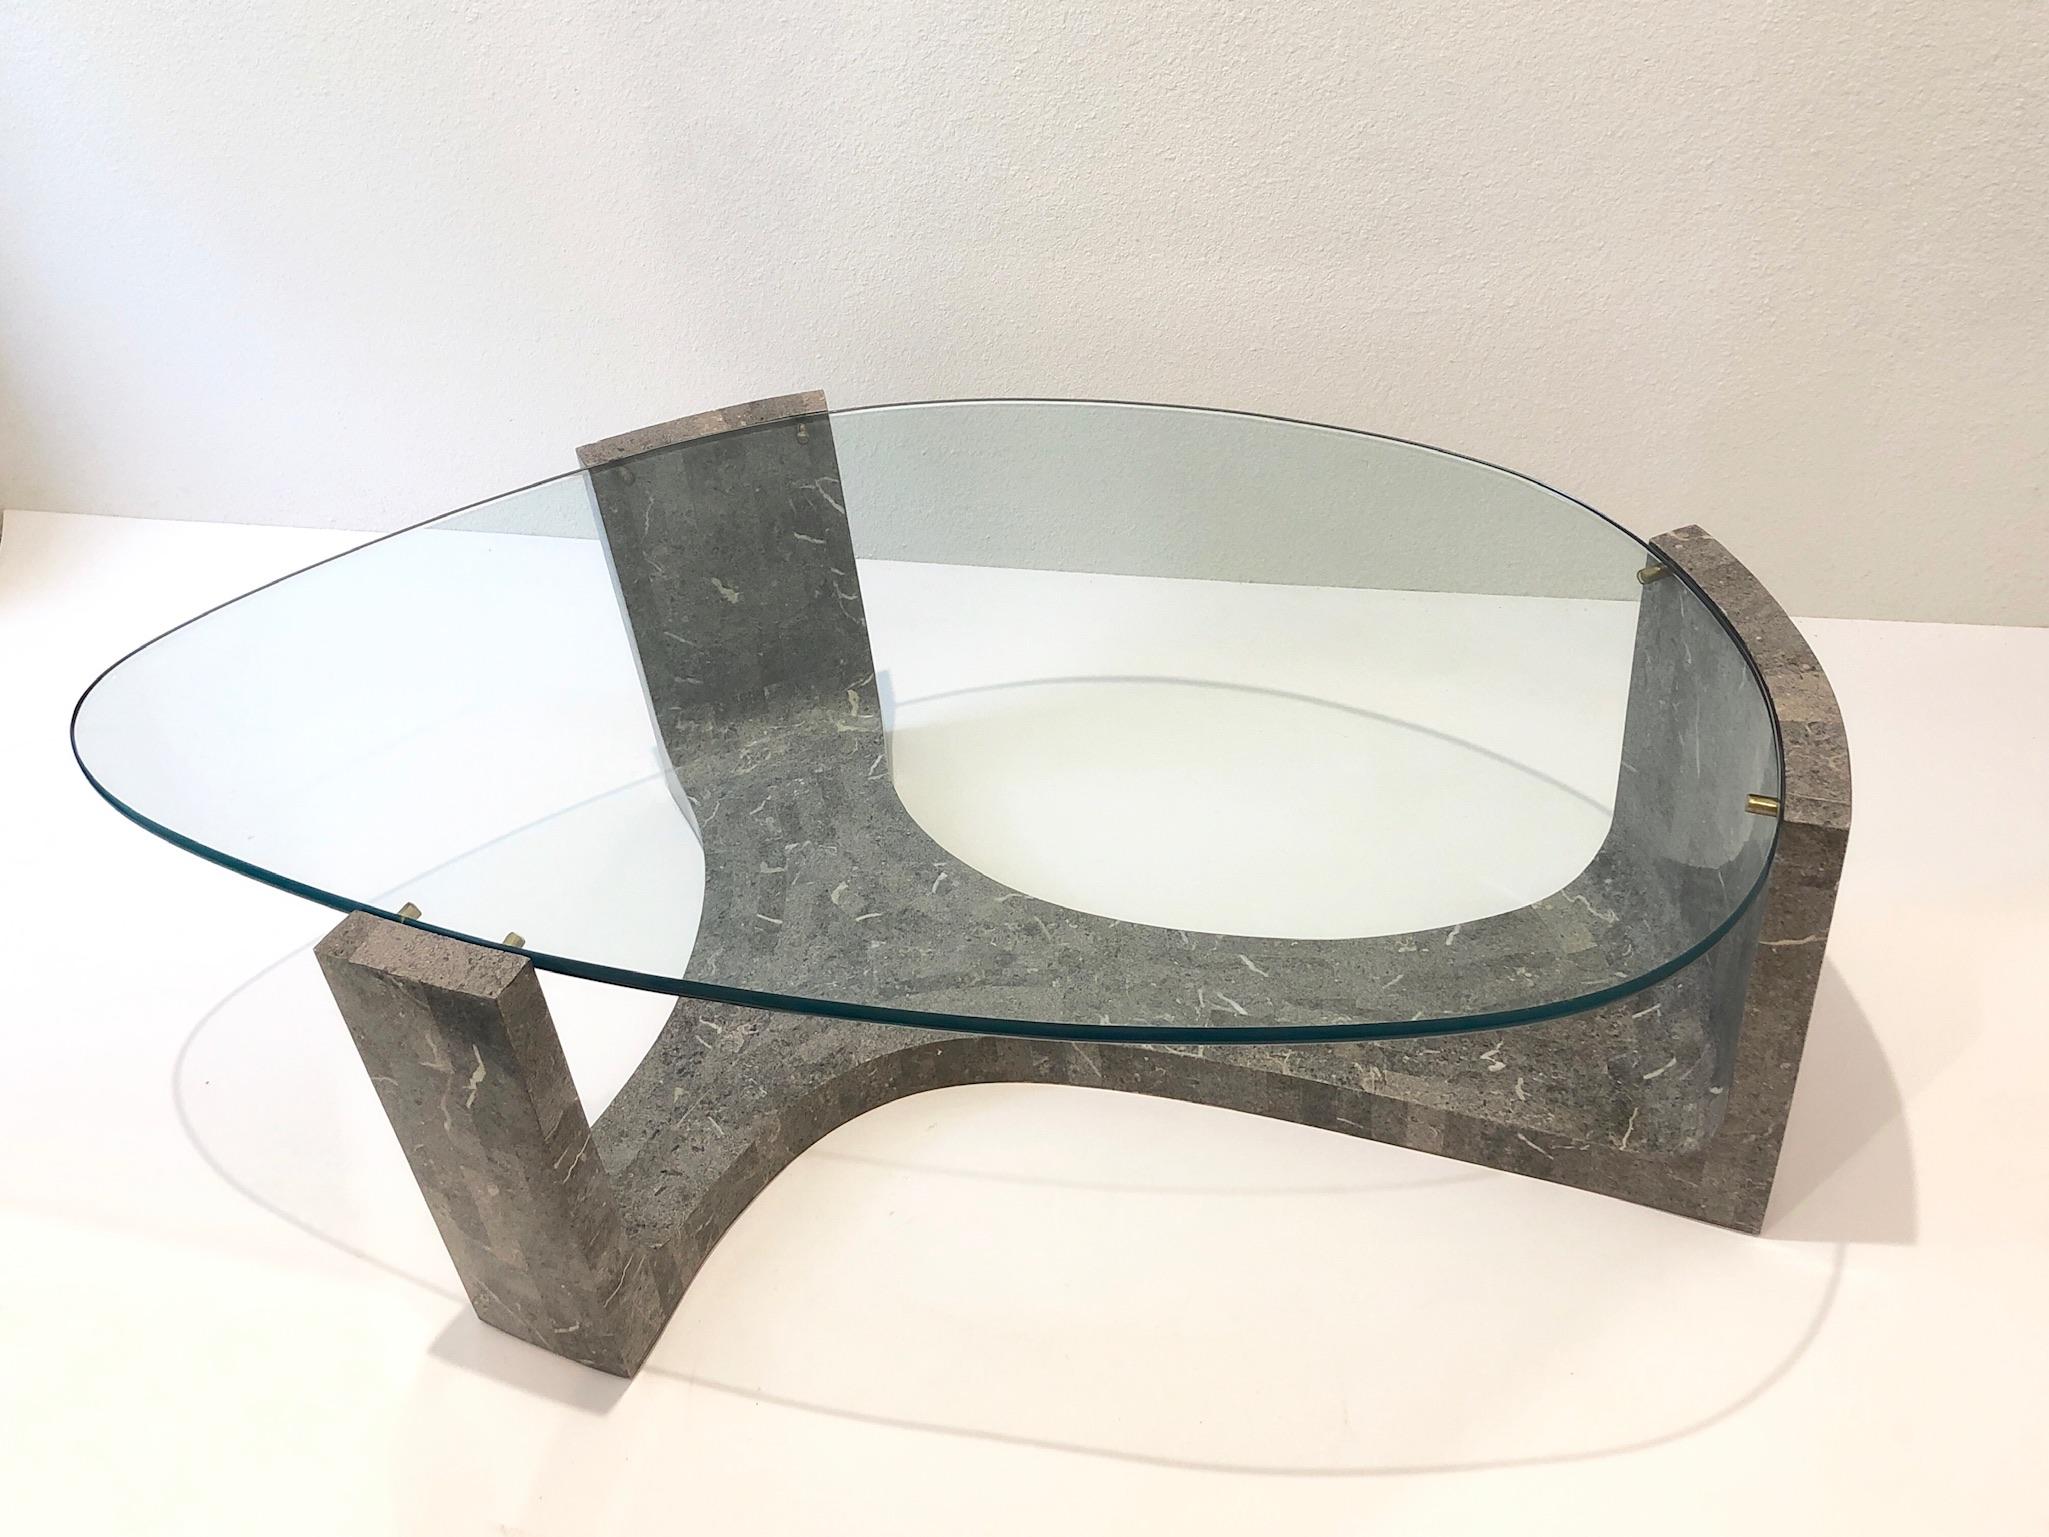 1980’s sculptural cocktail table by Maitland Smith.
Constructed of wood covered with gray tessellated marble, brass details and 5/8” thick glass top. 
Measurements: 51” Wide, 32.5” Deep and 16.25” High.